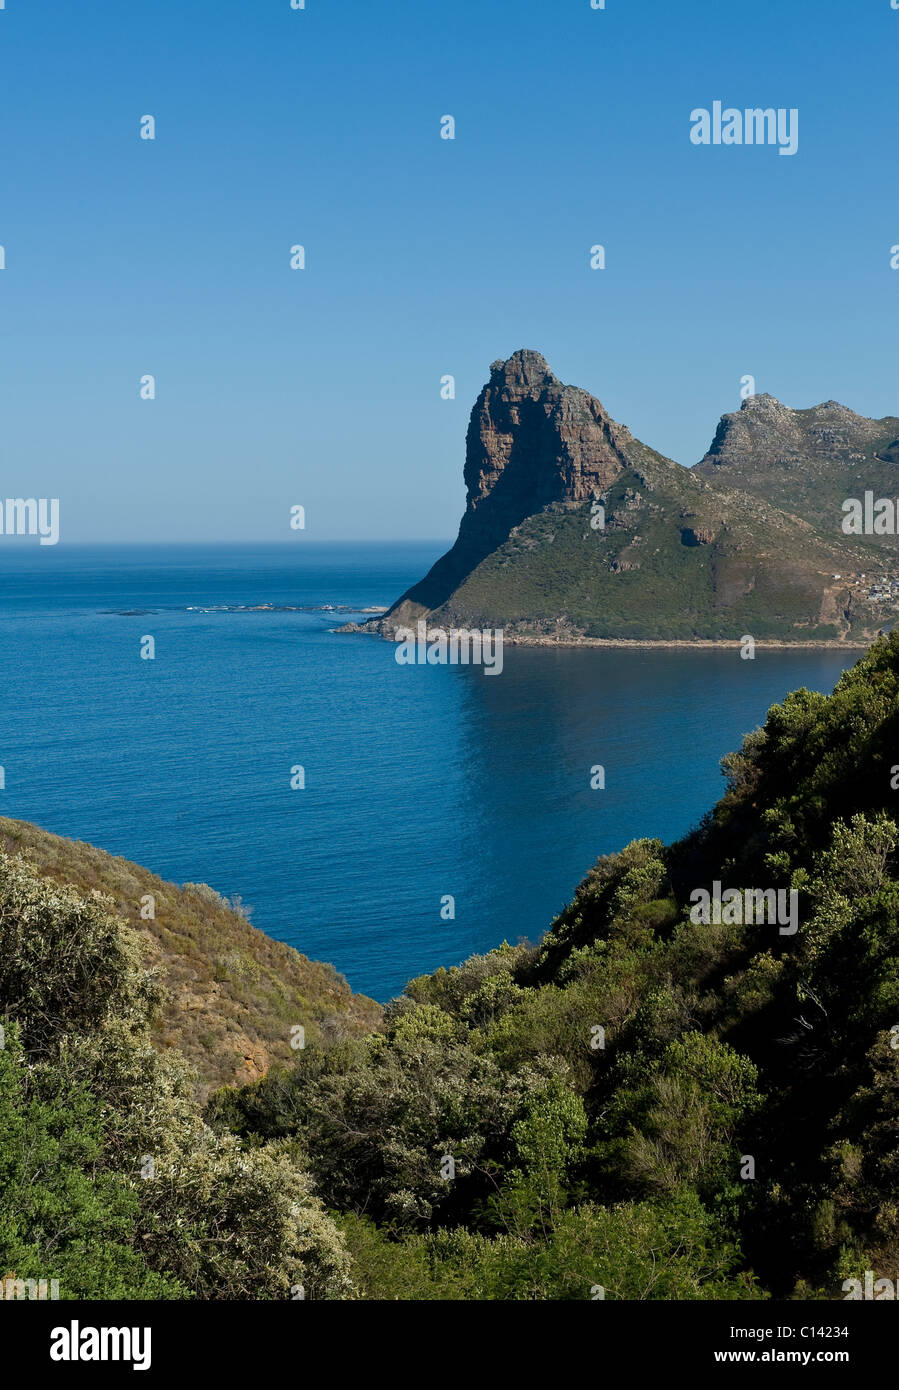 The Sentinel Rock at Hout Bay, Cape Town, South Africa Stock Photo